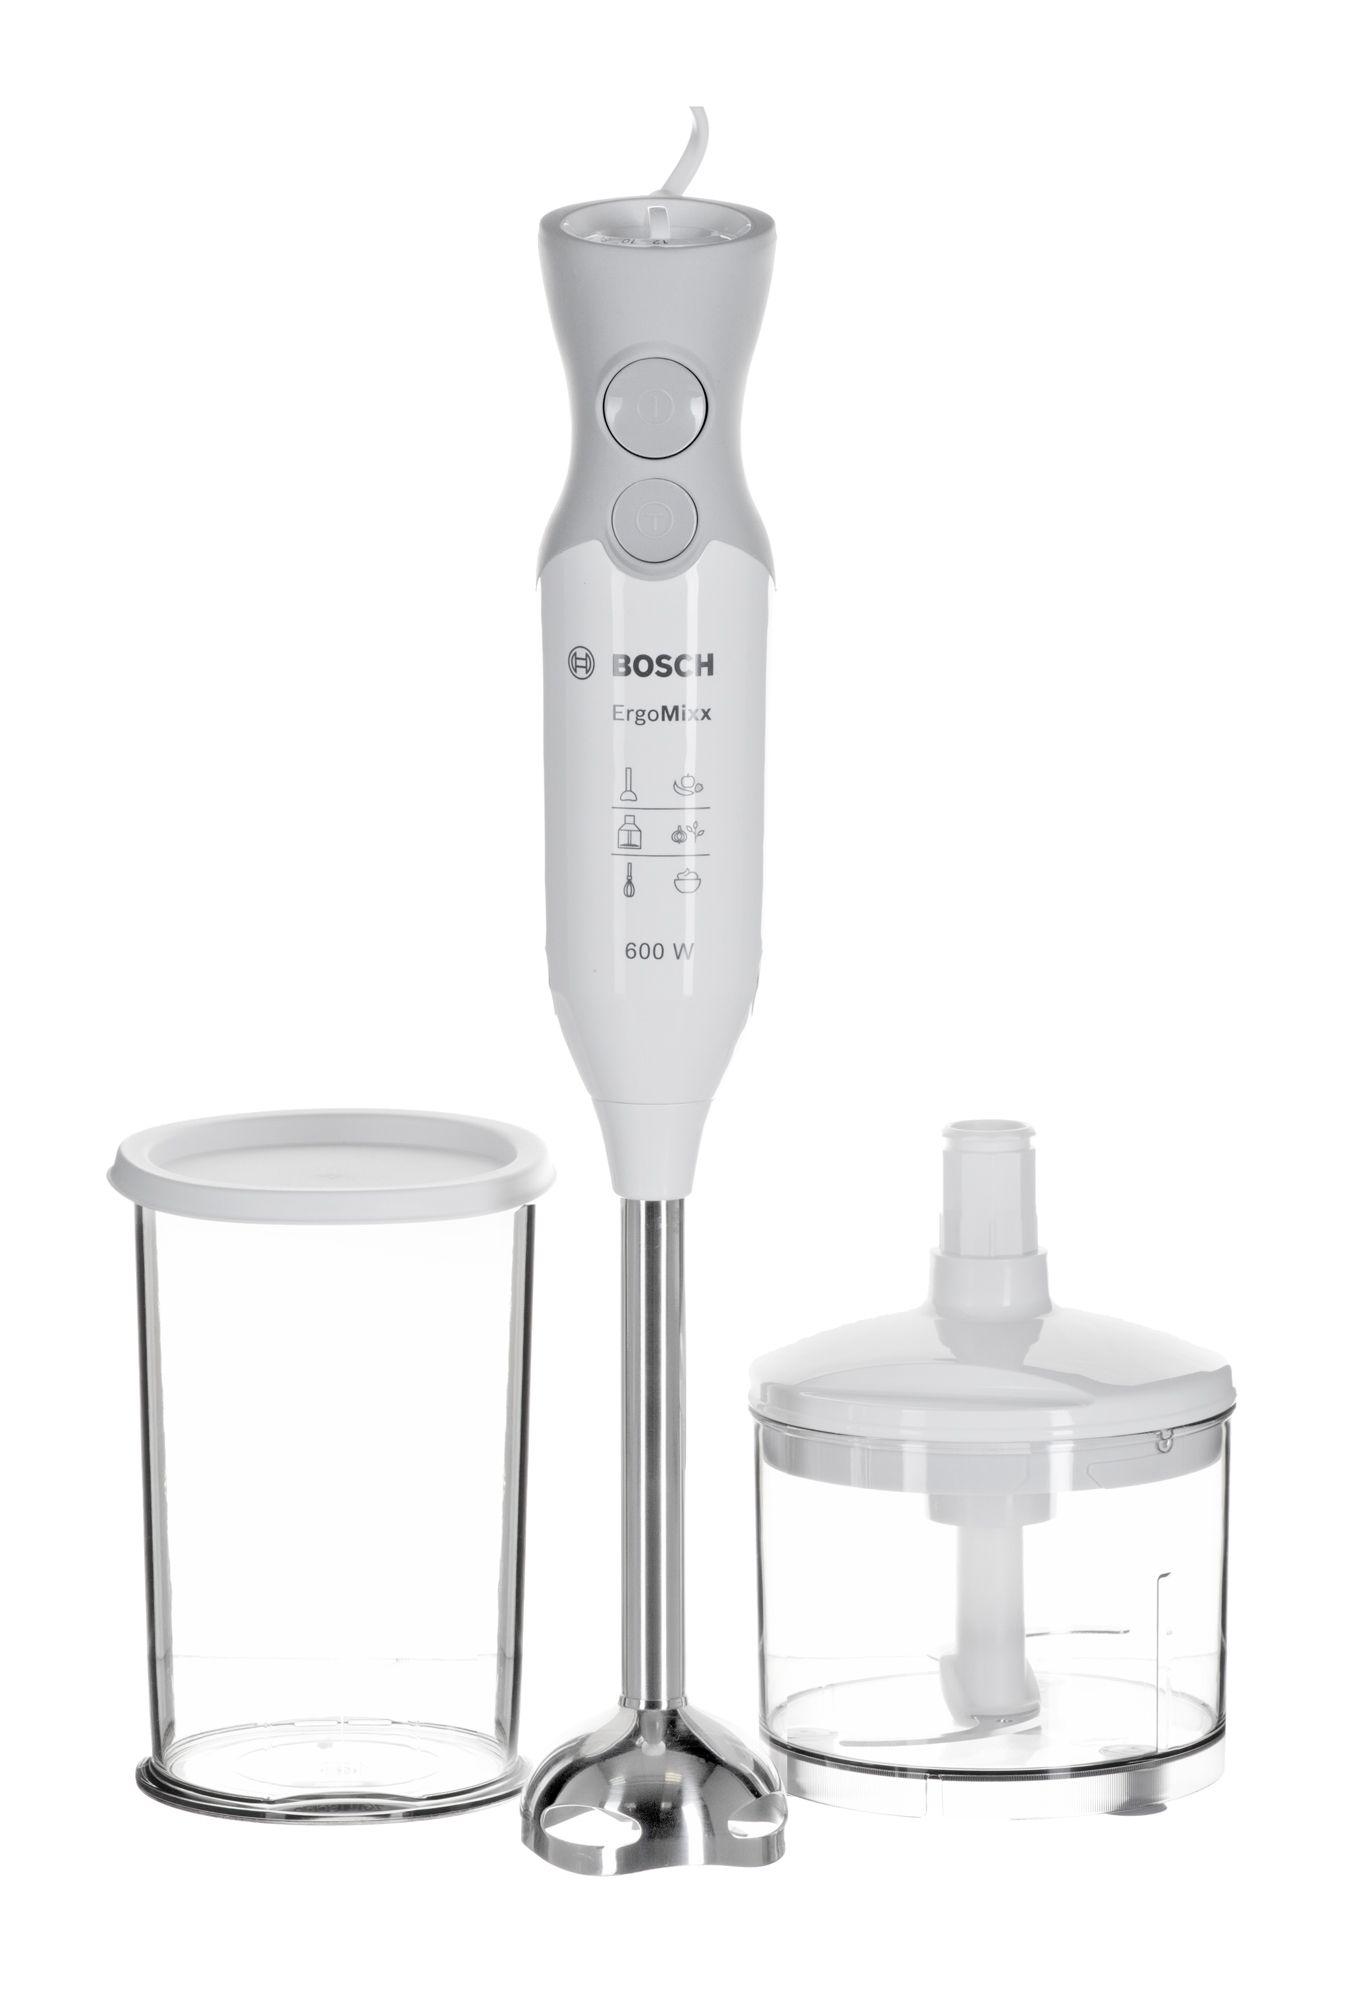 BOSCH Msm66155 Stainless Steel Handle With A Measuring Cup 1000 Watt Hand  Blender - Silver Black